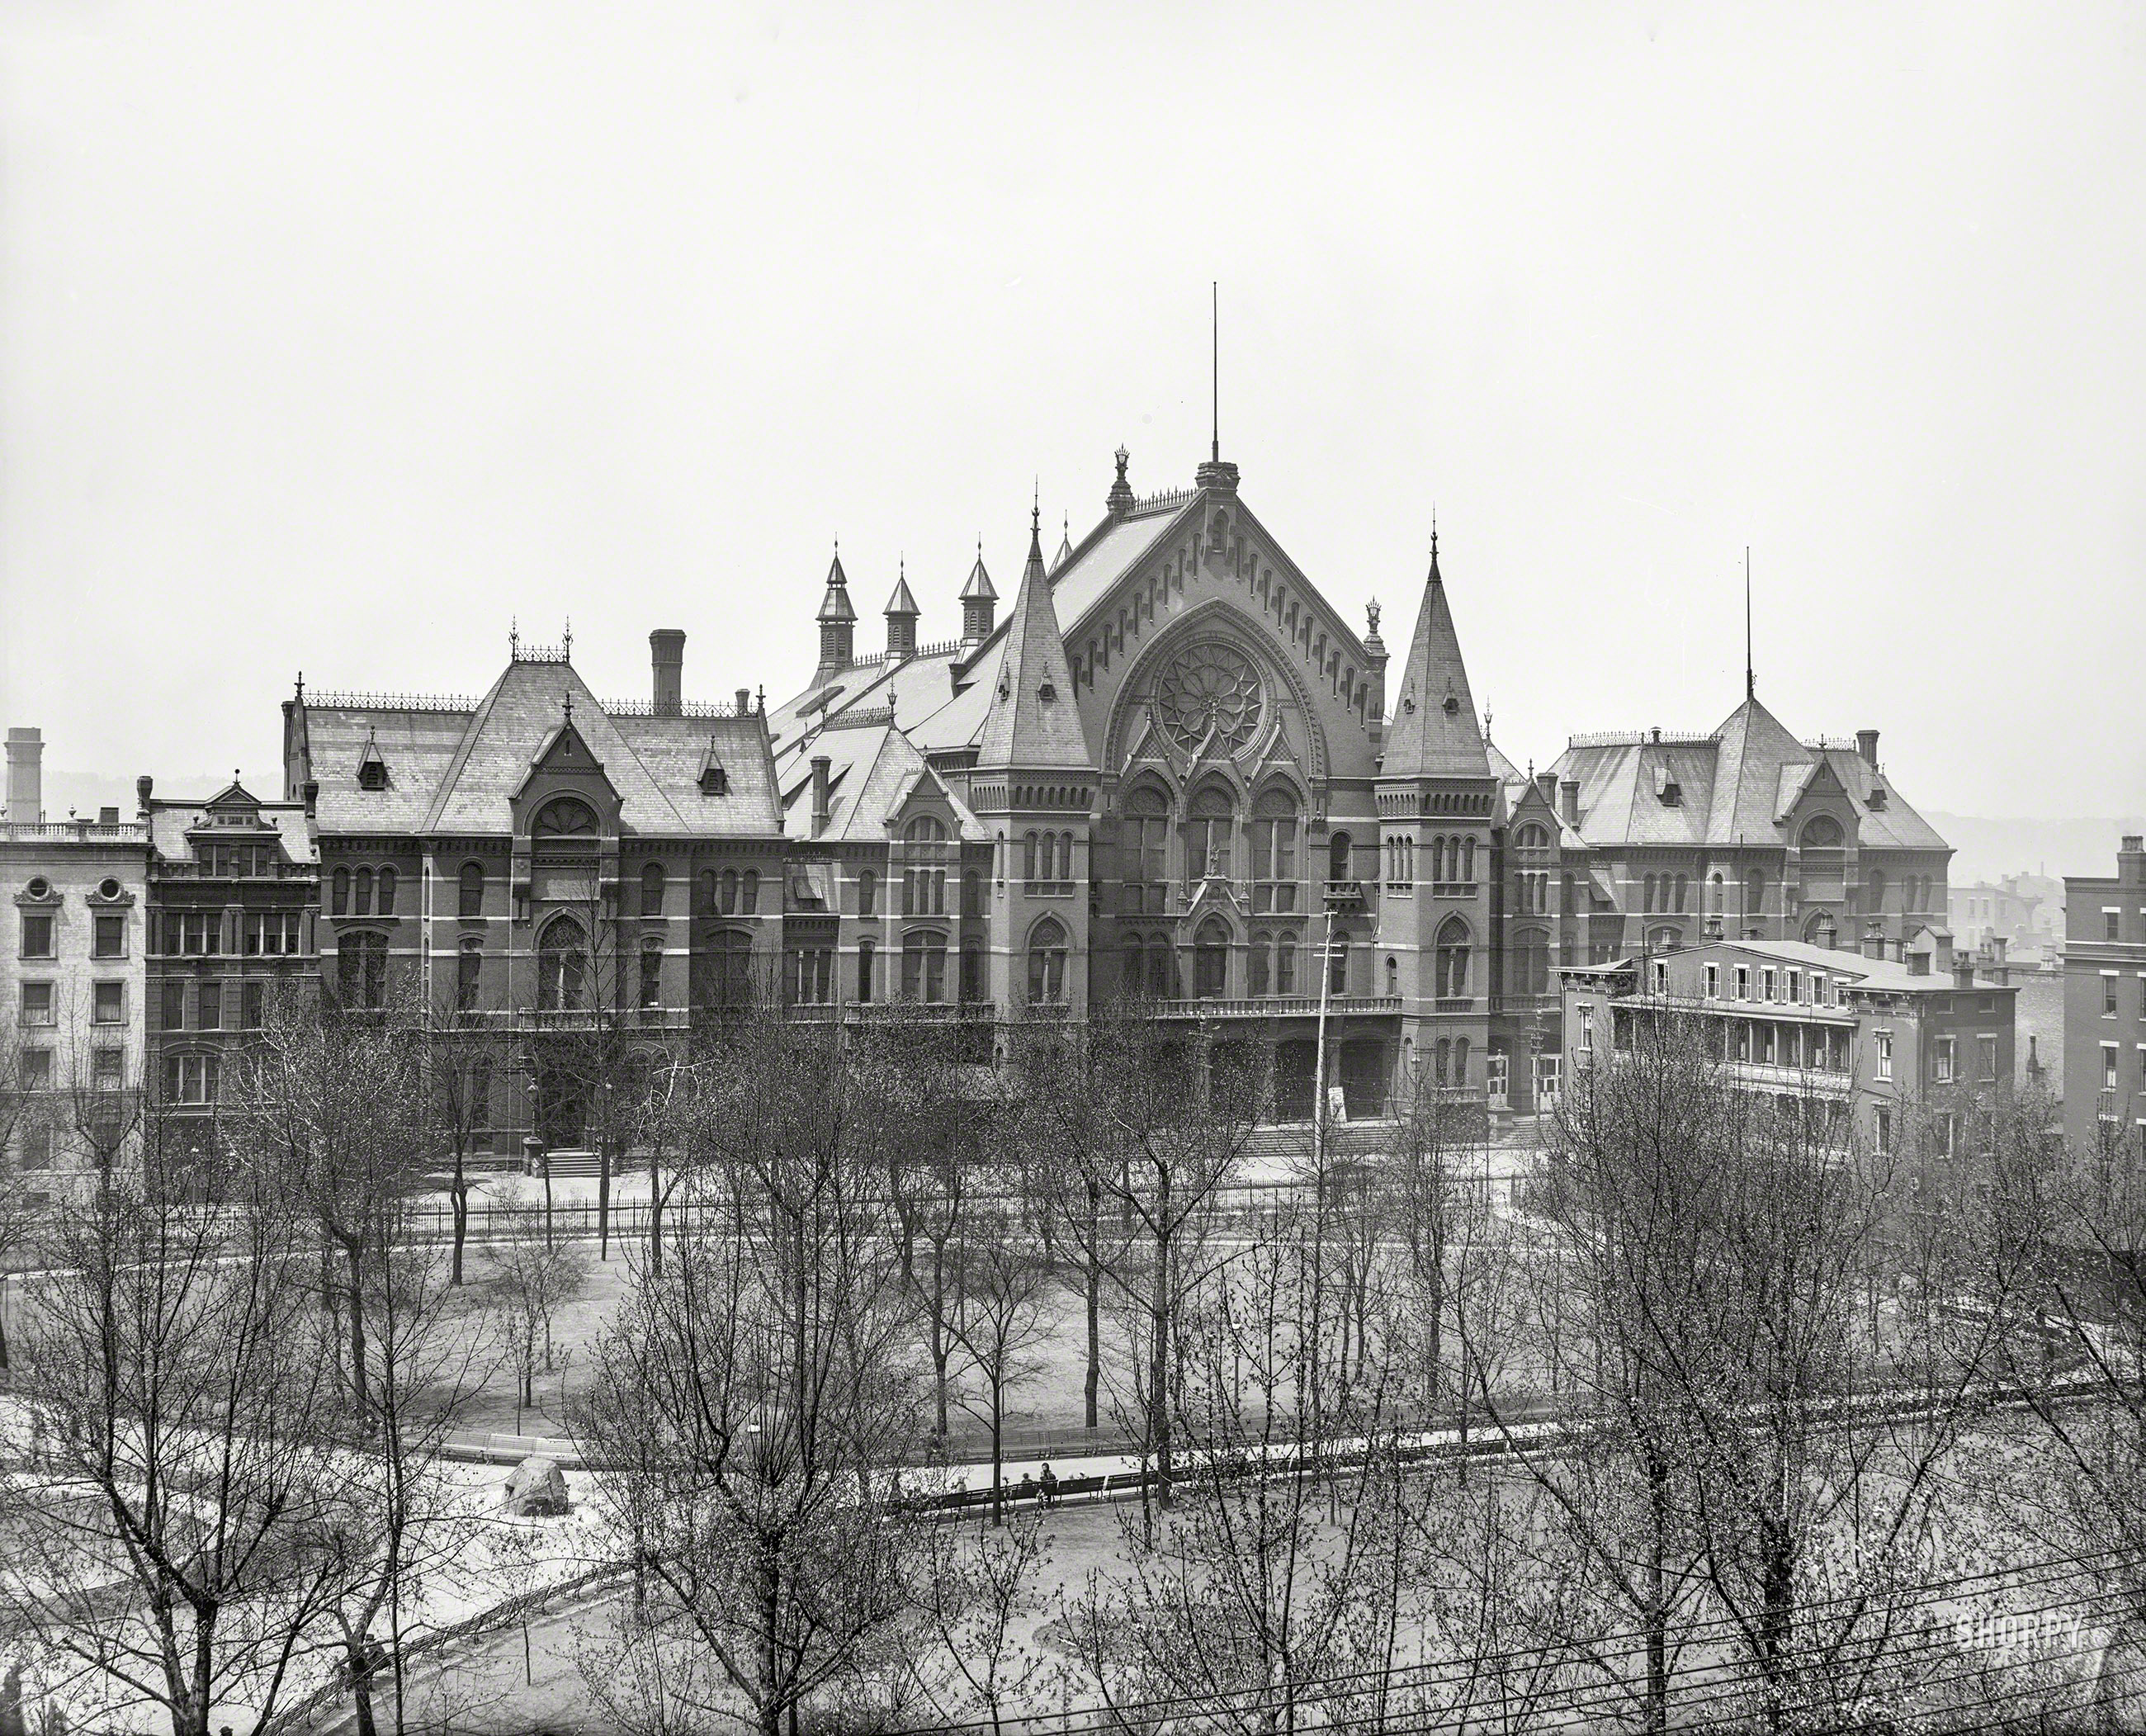 1906. "Music Hall, Washington Park." Cincinnati Music Hall on Elm Street, completed in 1878. 8x10 inch dry plate glass negative, Detroit Photographic Company. View full size.